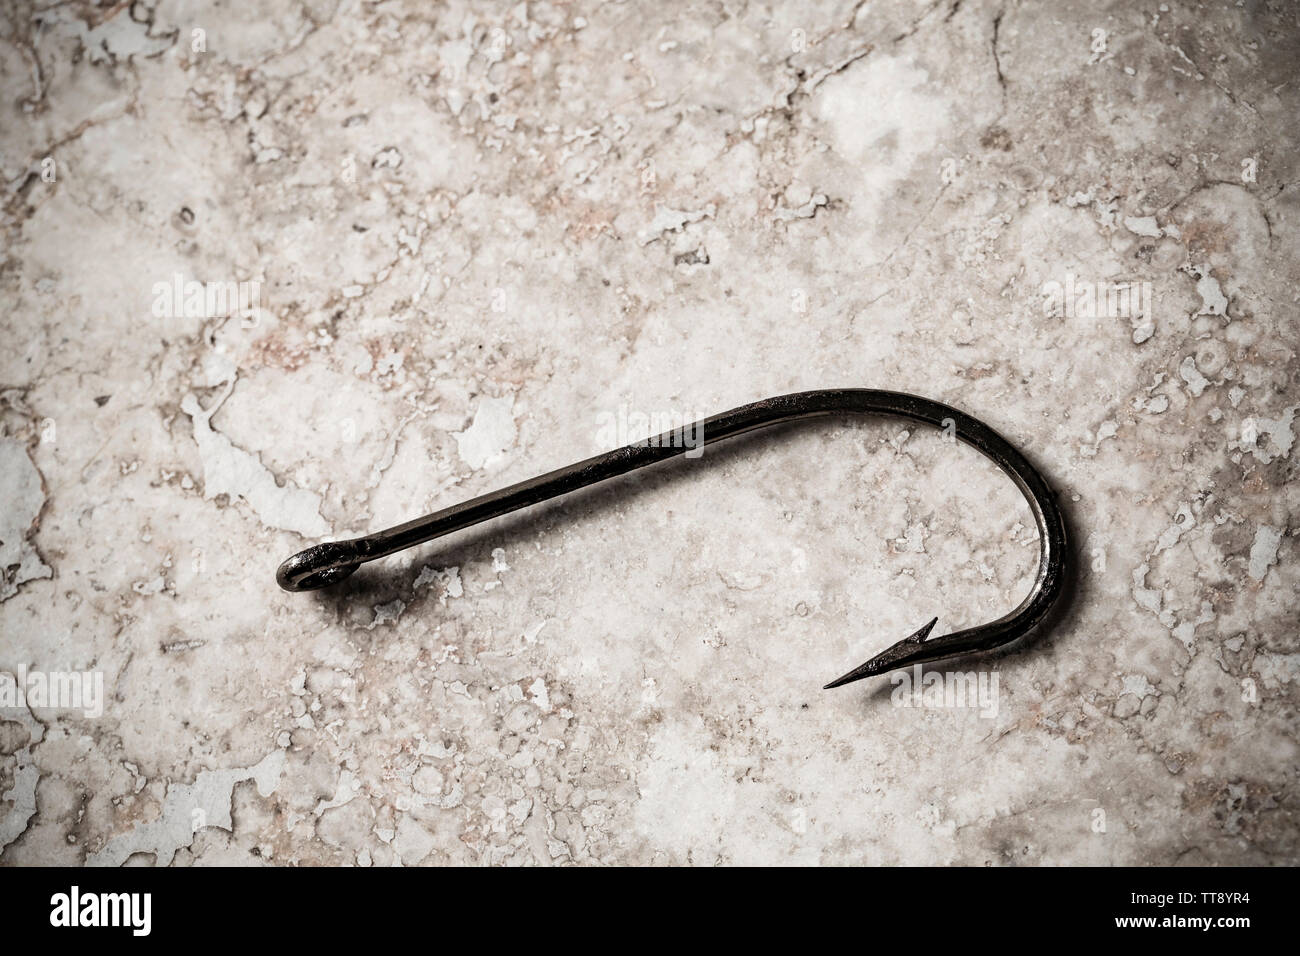 A single large seafishing hook displayed on a stone background. Hooks are equipped with barbs to stop them falling out of a hooked fish and to prevent Stock Photo